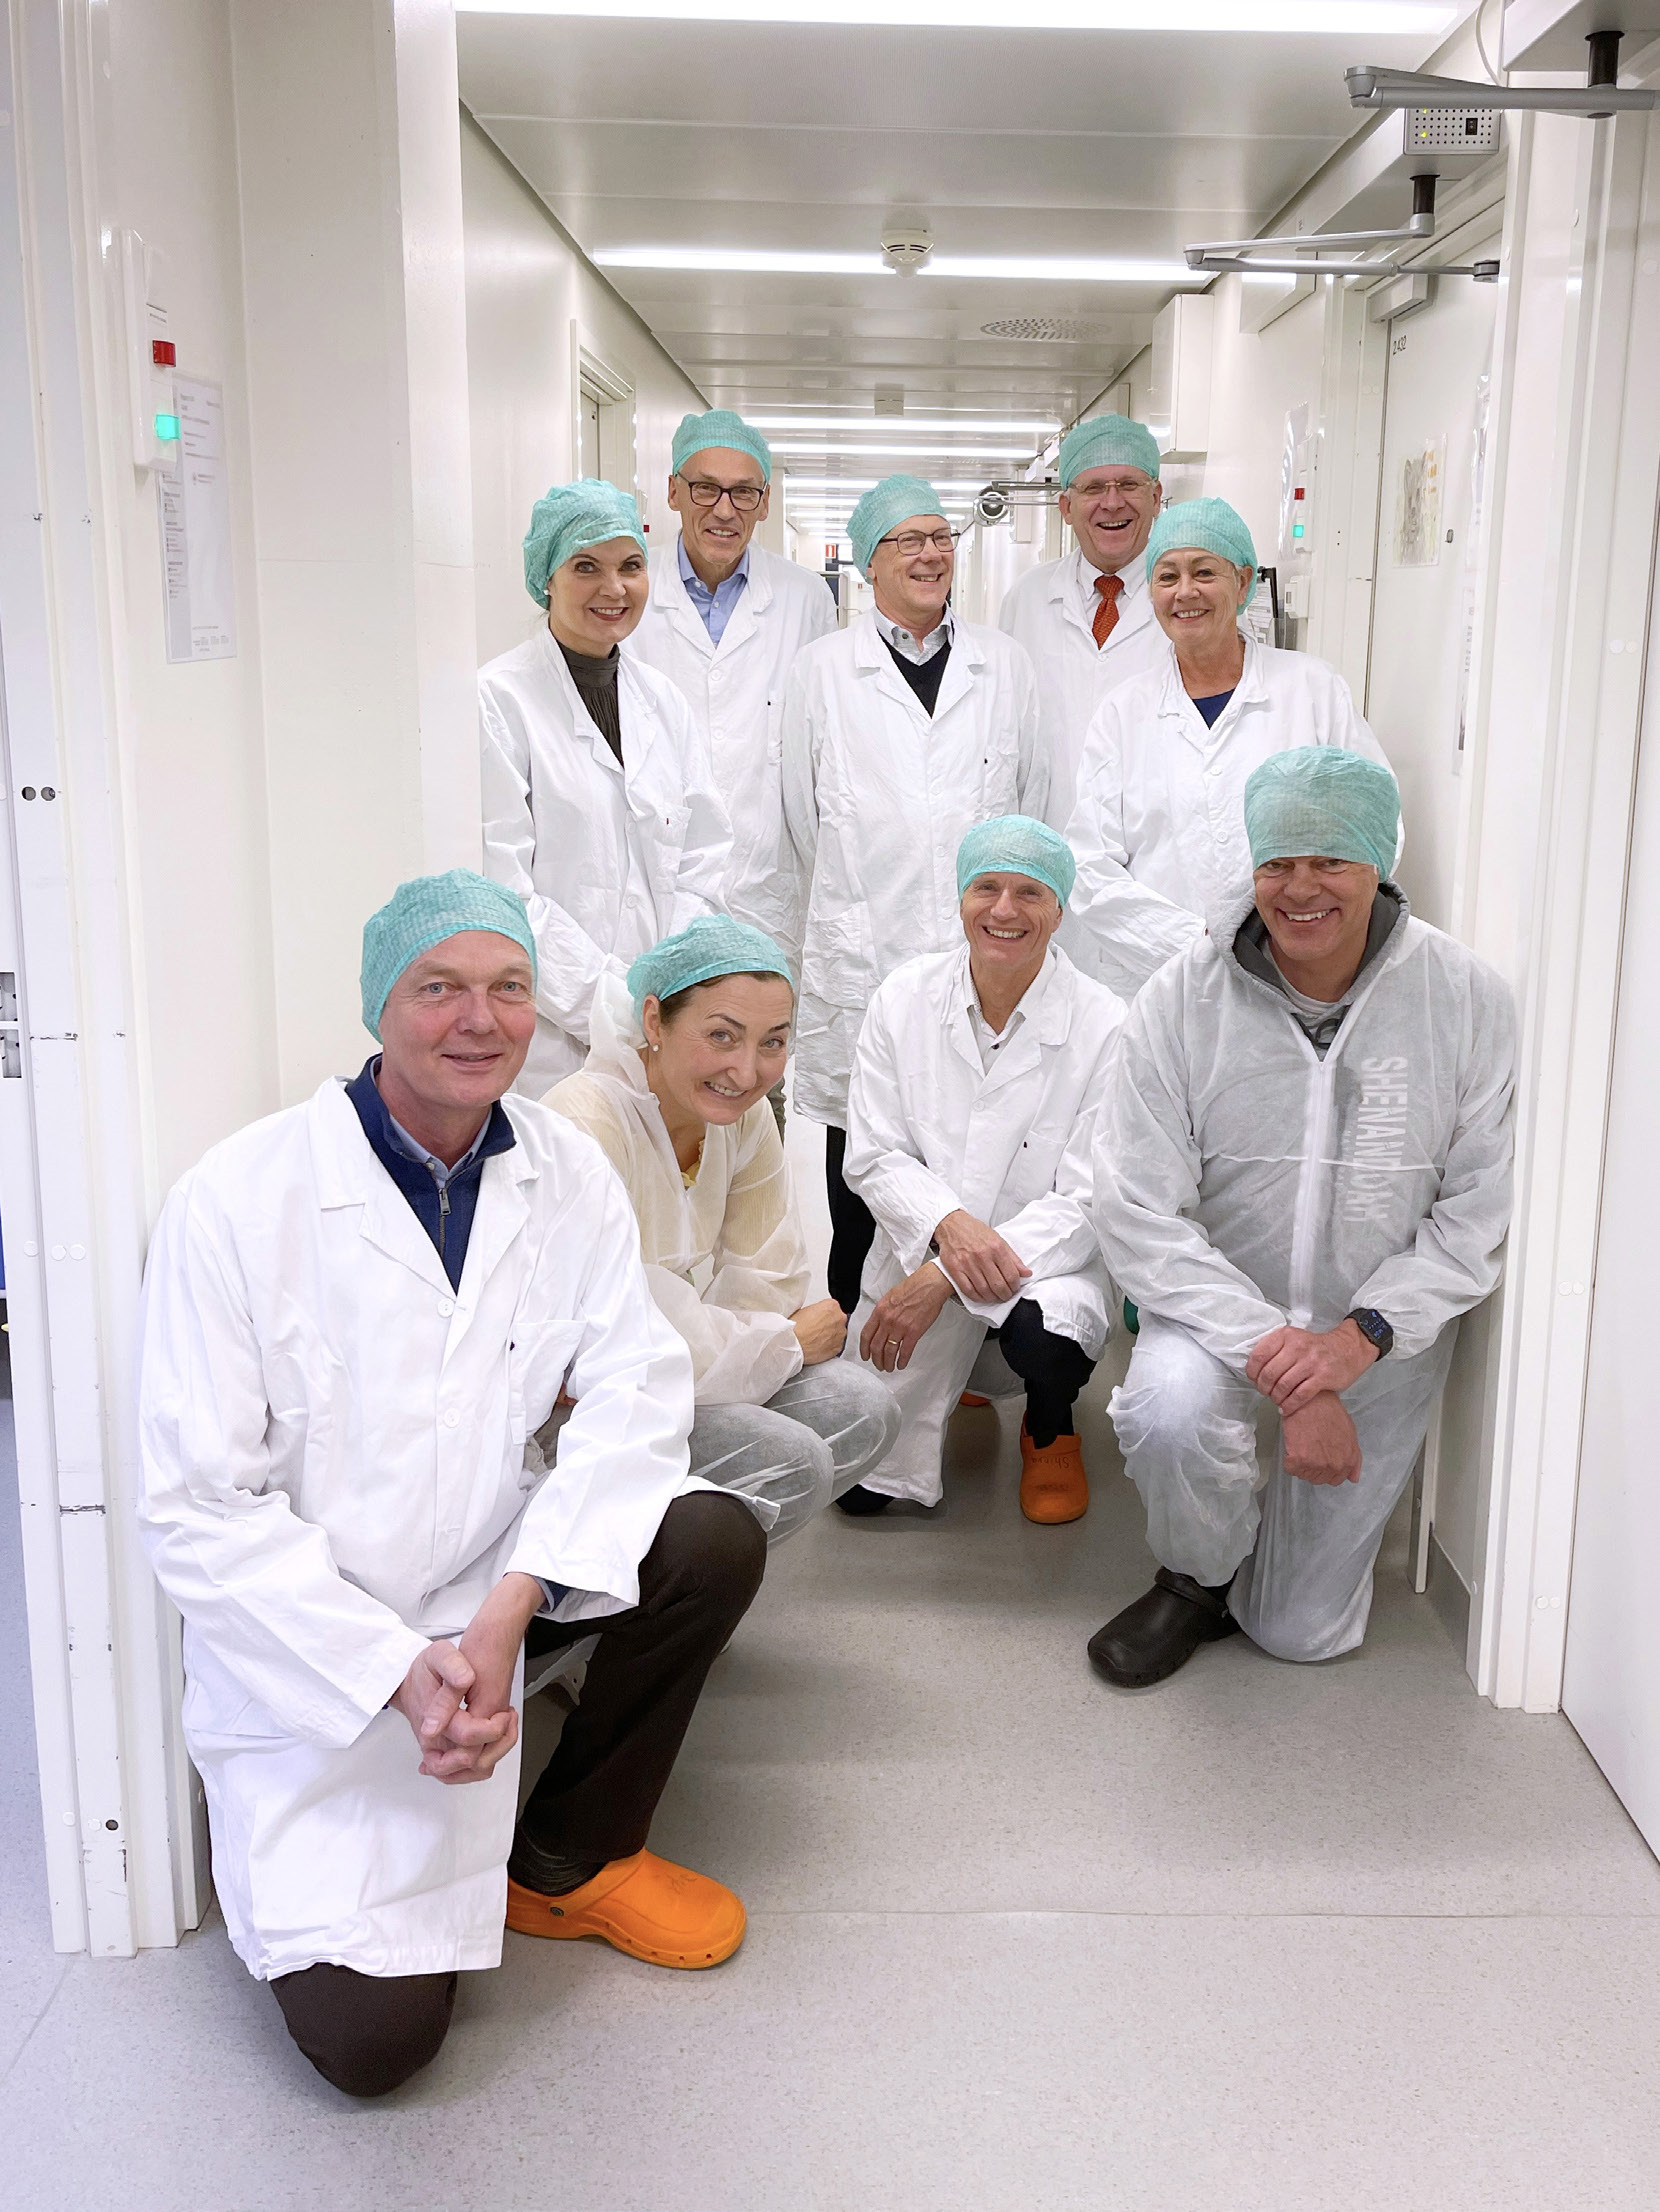 The Research Fund visiting the lab at the Kavli Institute.